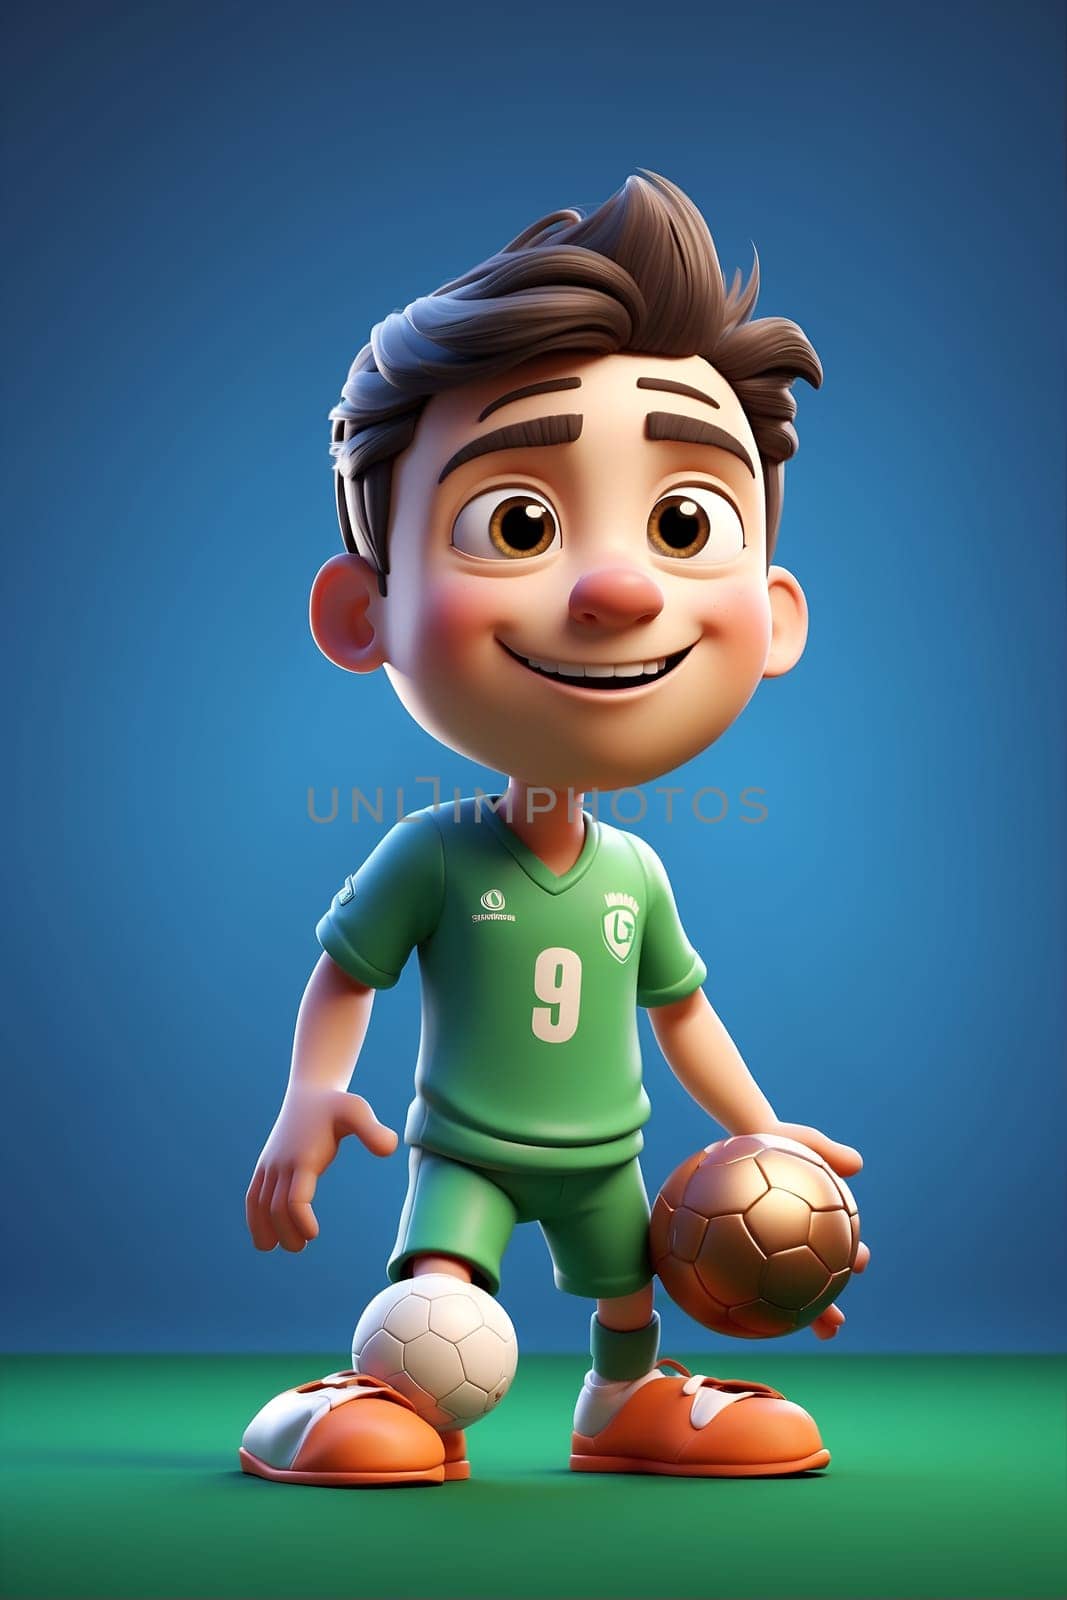 A lively cartoon character joyfully holds a soccer ball, showcasing a fun and playful sports illustration.